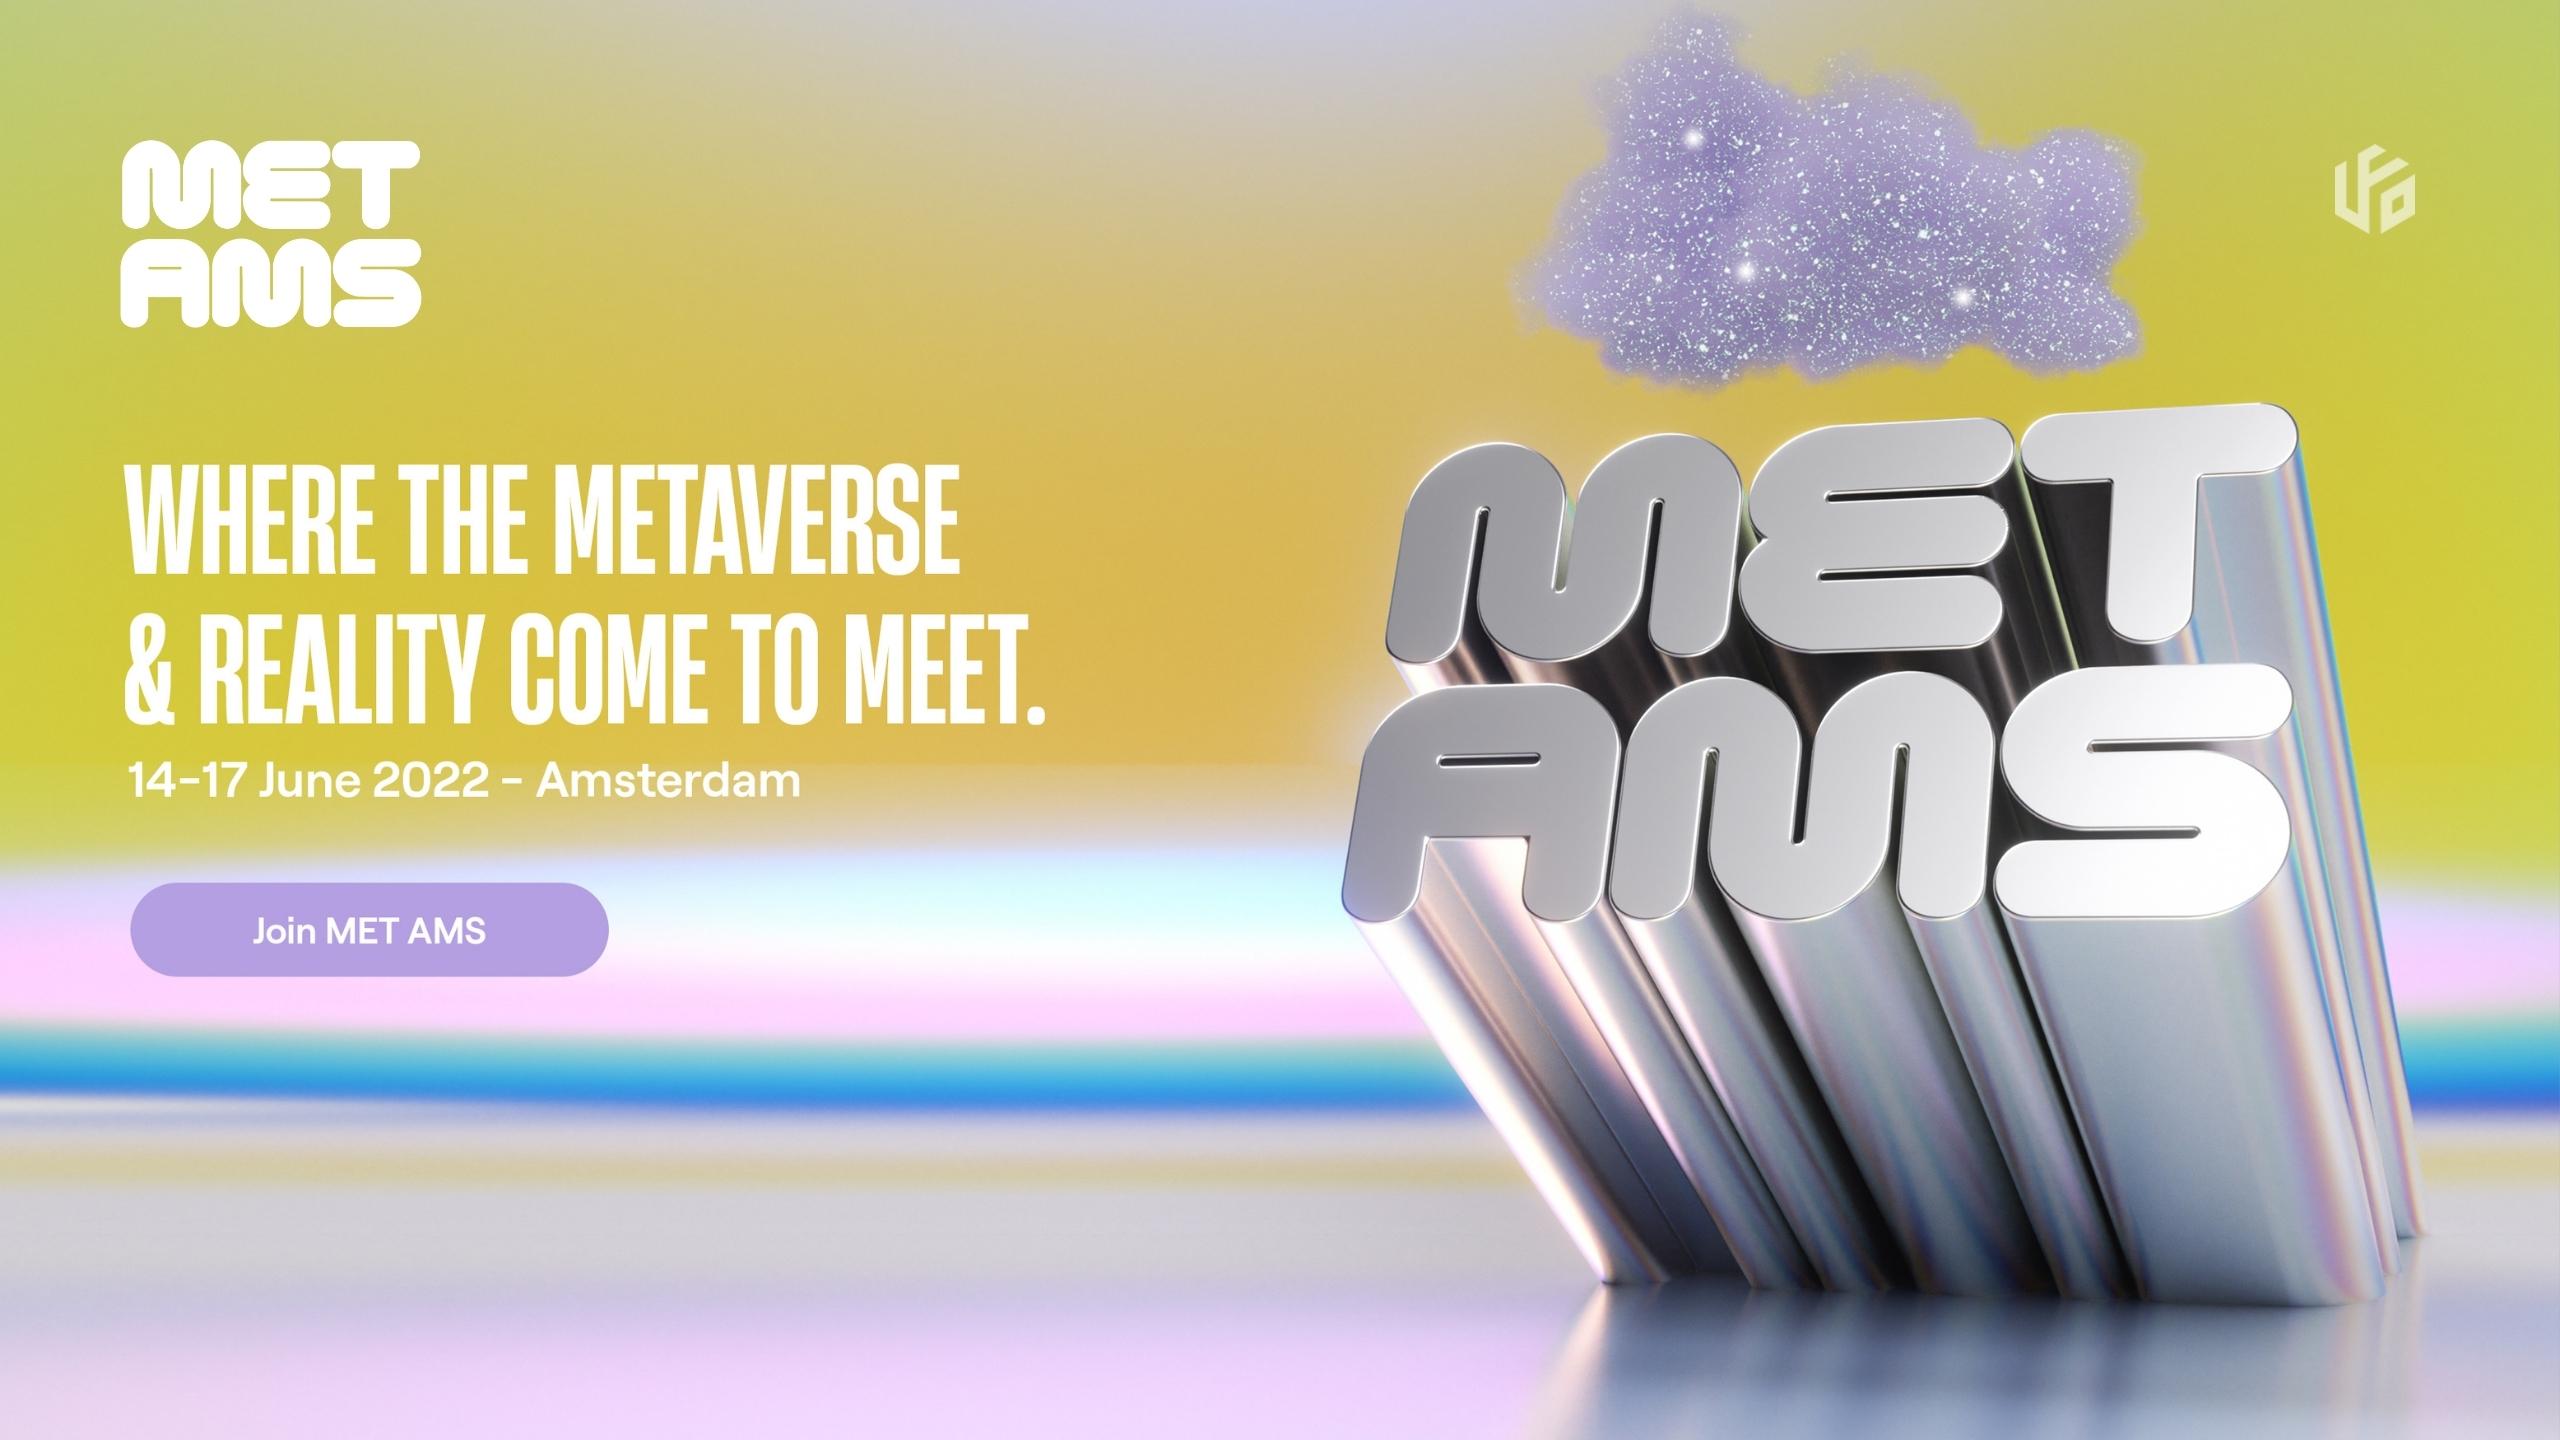 Amsterdam To Host Europe’s First Metaverse Festival Met Ams